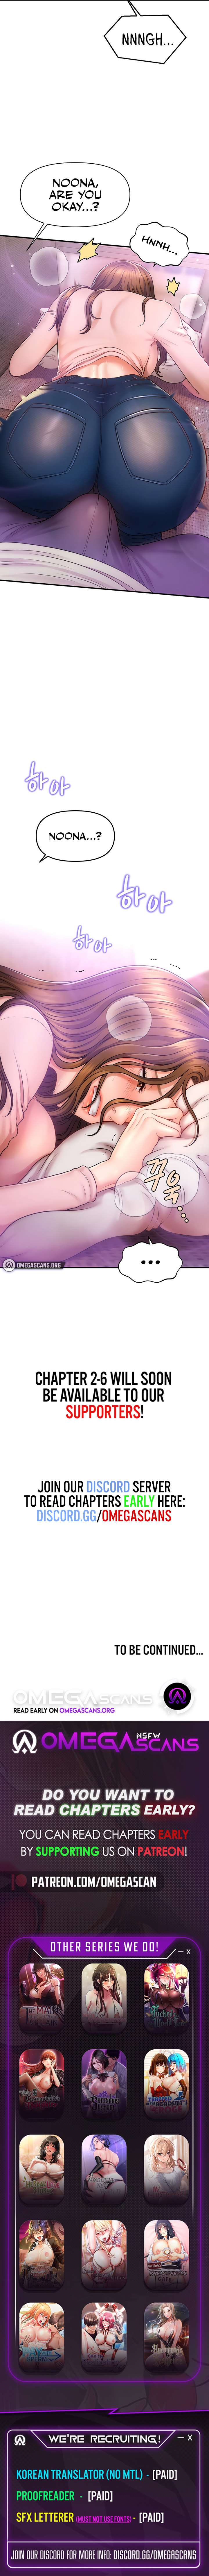 How to Conquer Women with Hypnosis - Chapter 1 Page 17